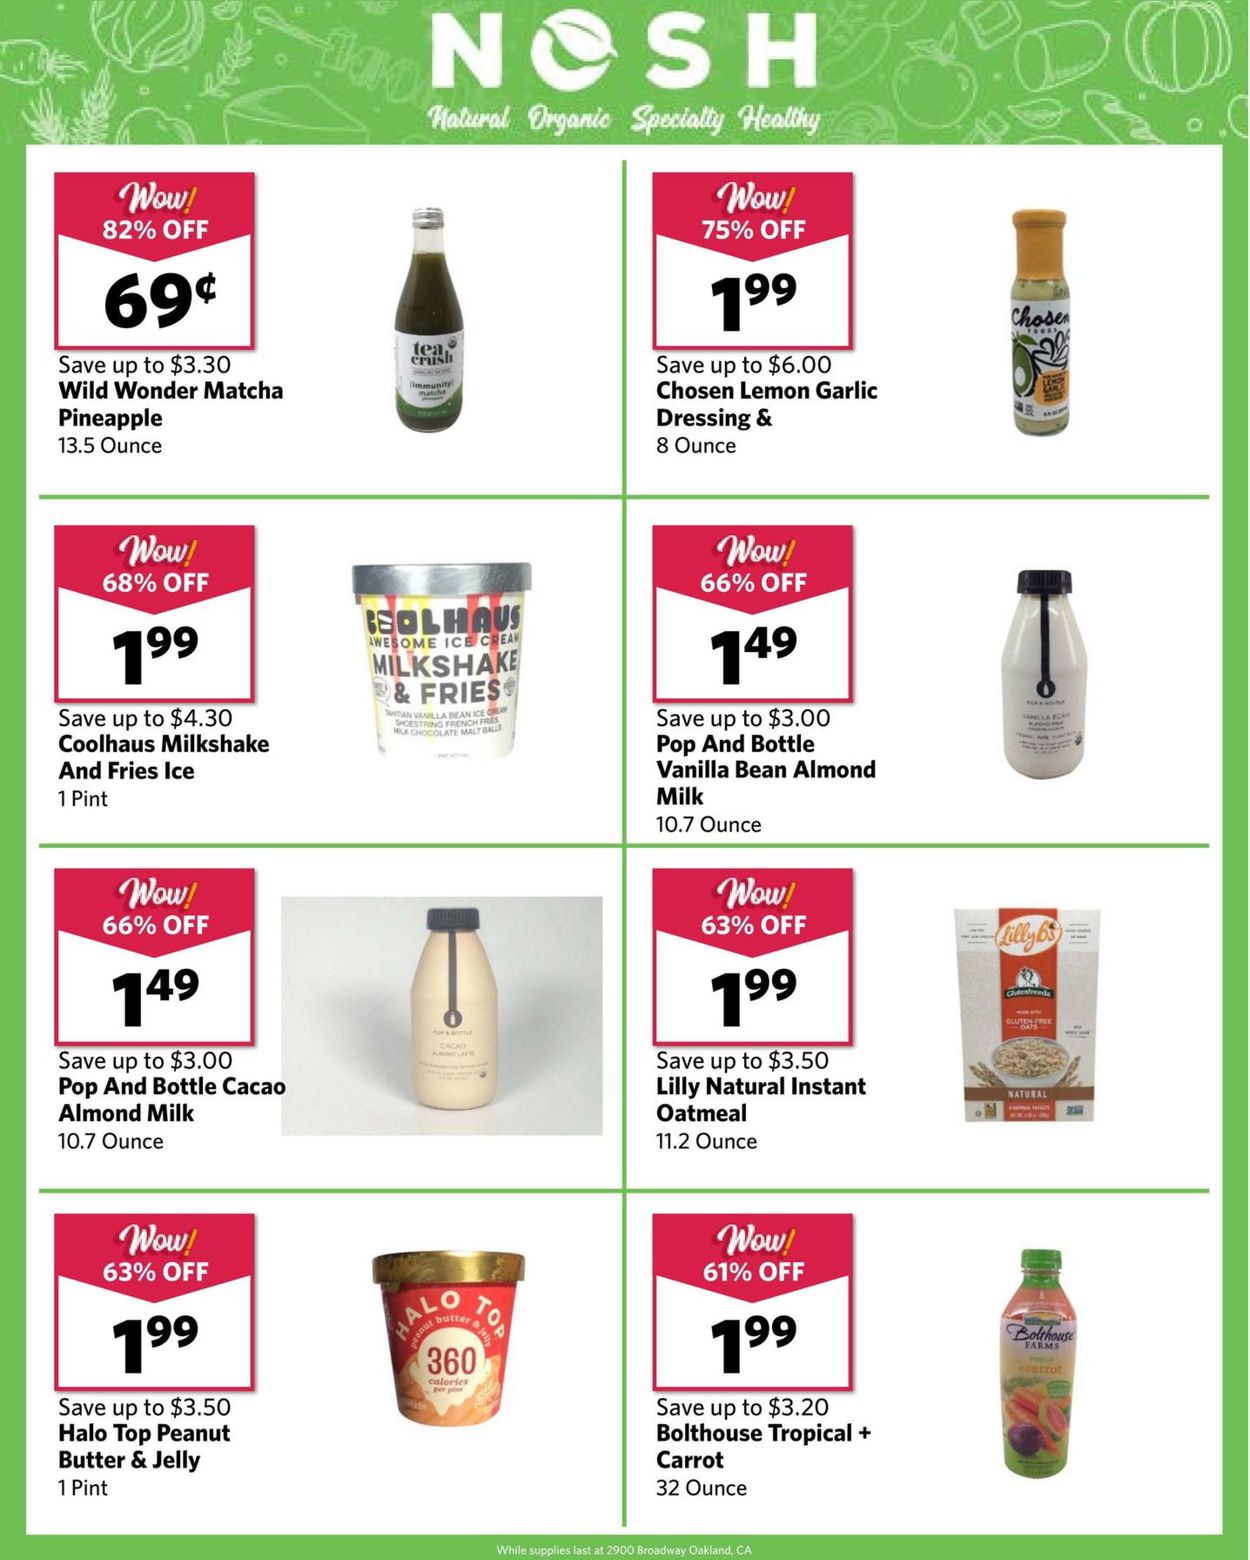 Grocery Outlet Ad from 12/30/2020